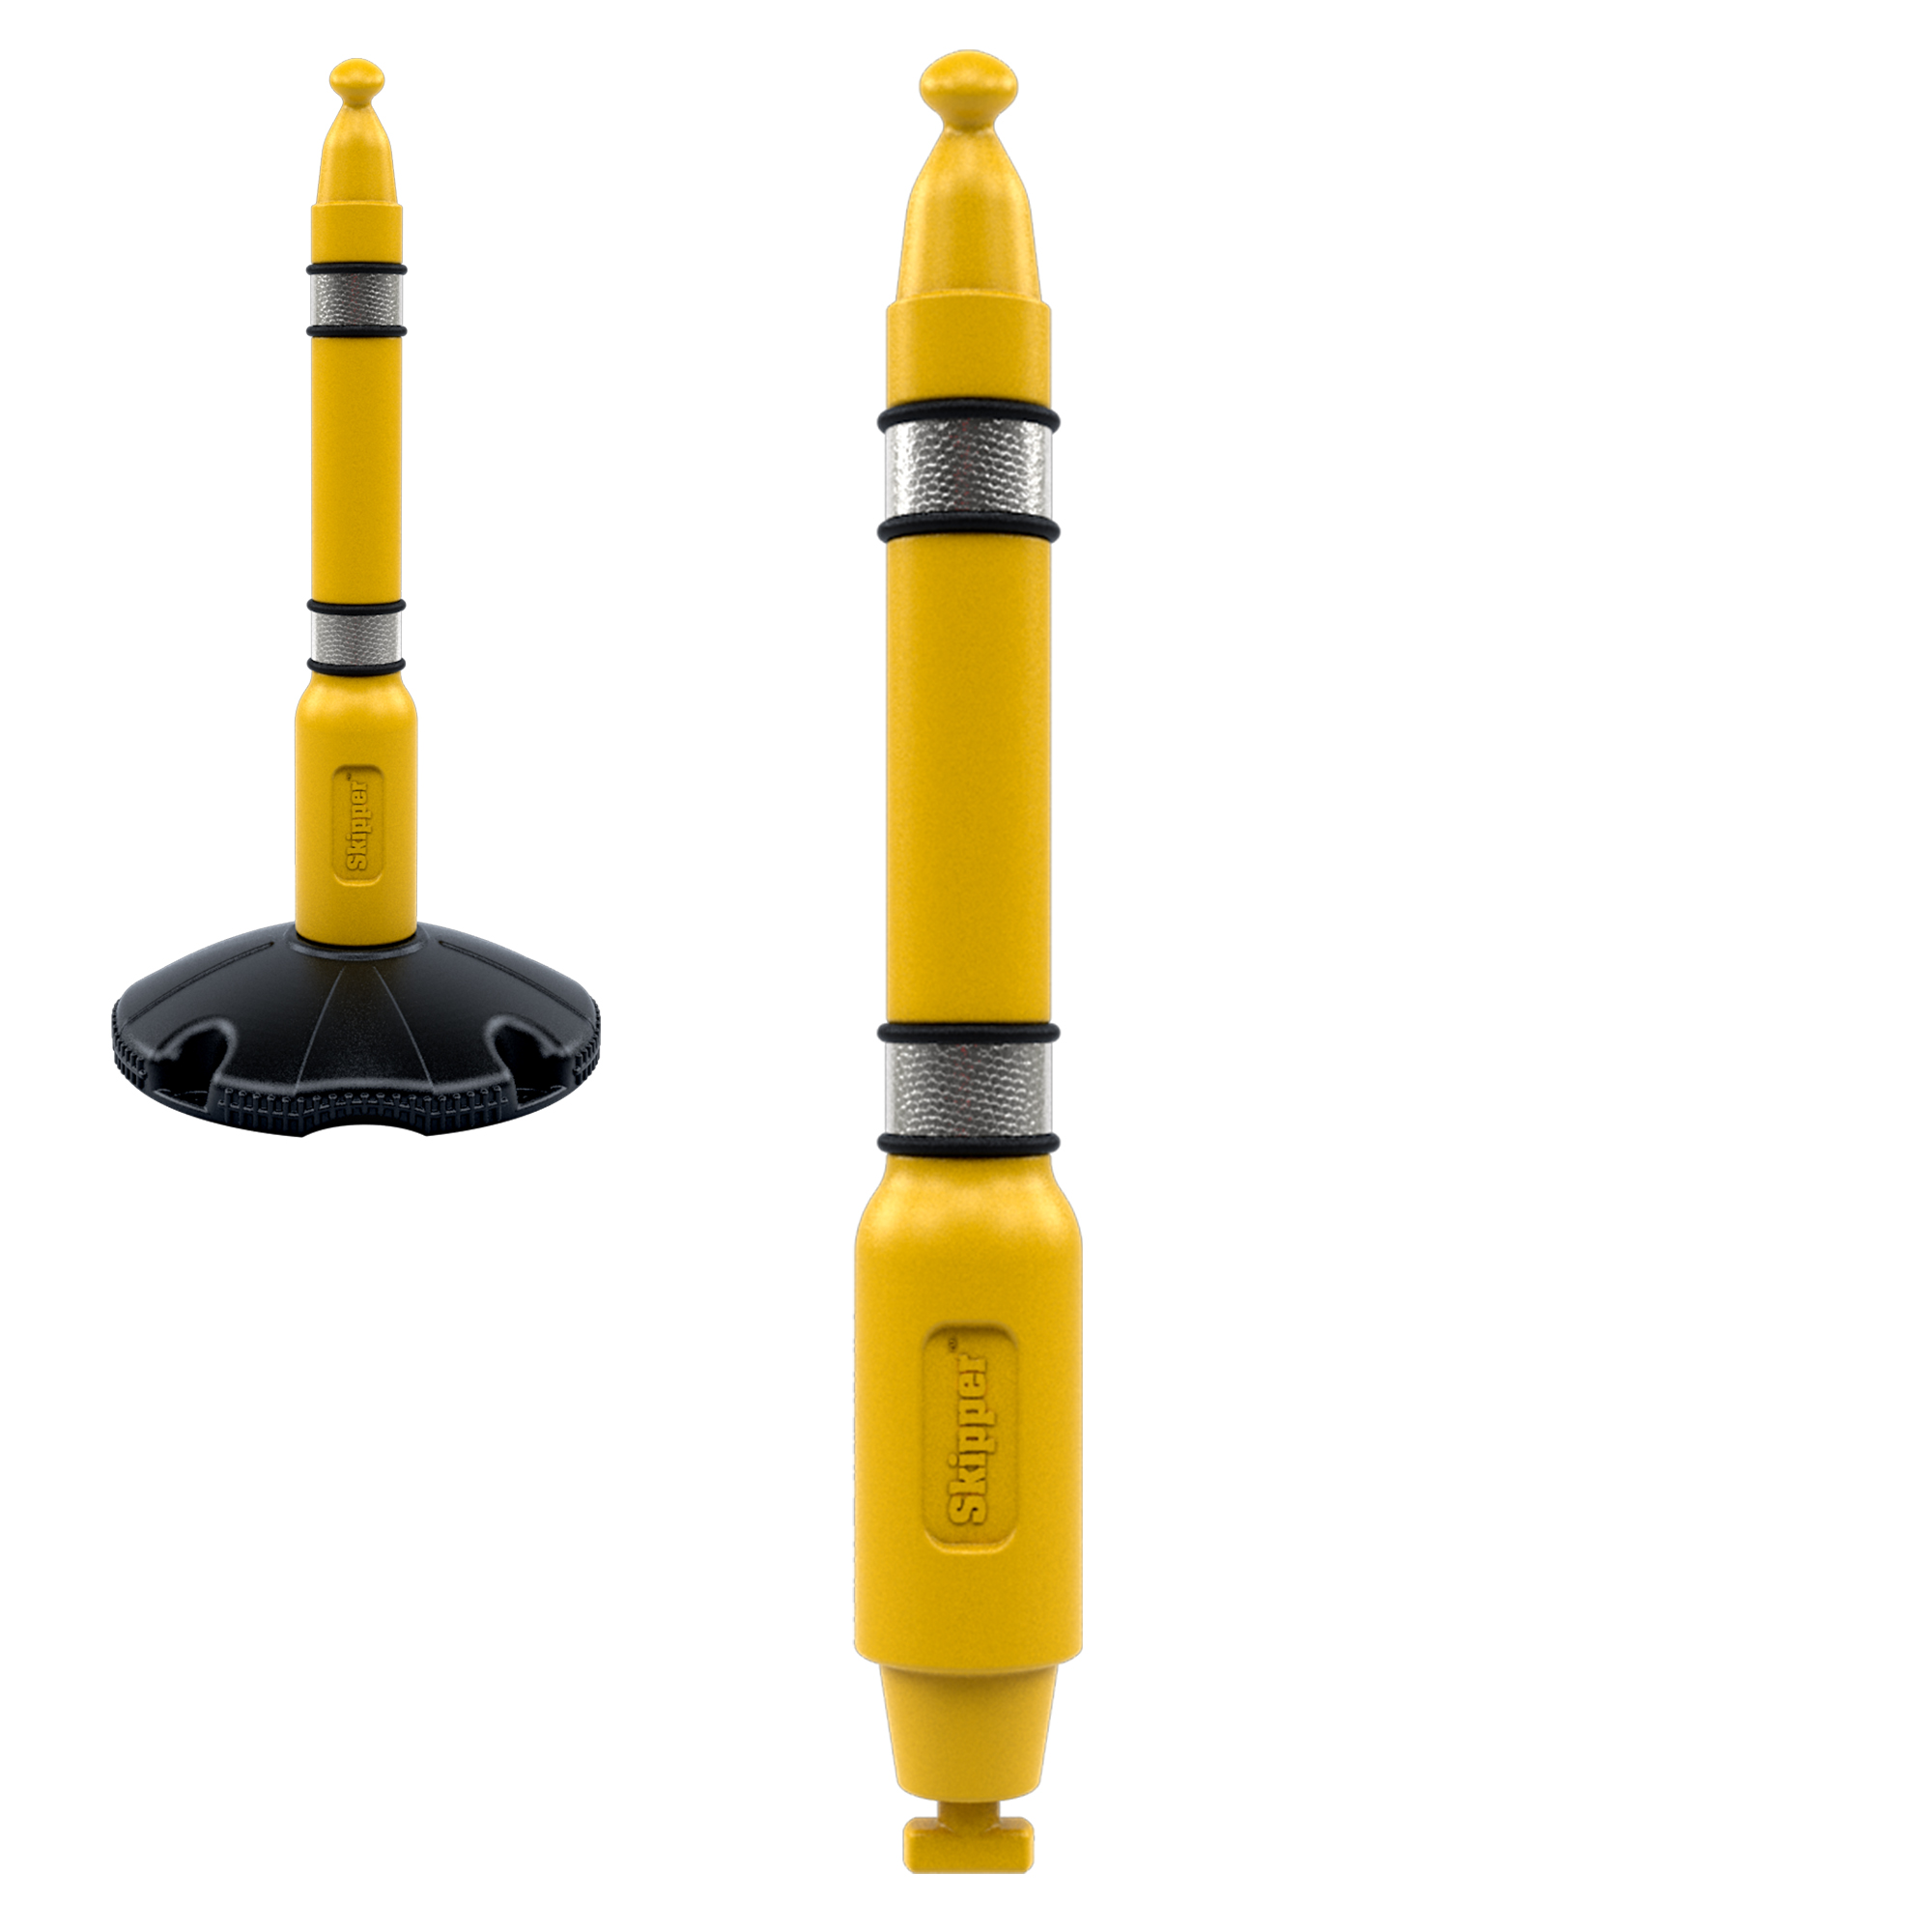 Post For Skipper Post & Base System (Yellow)